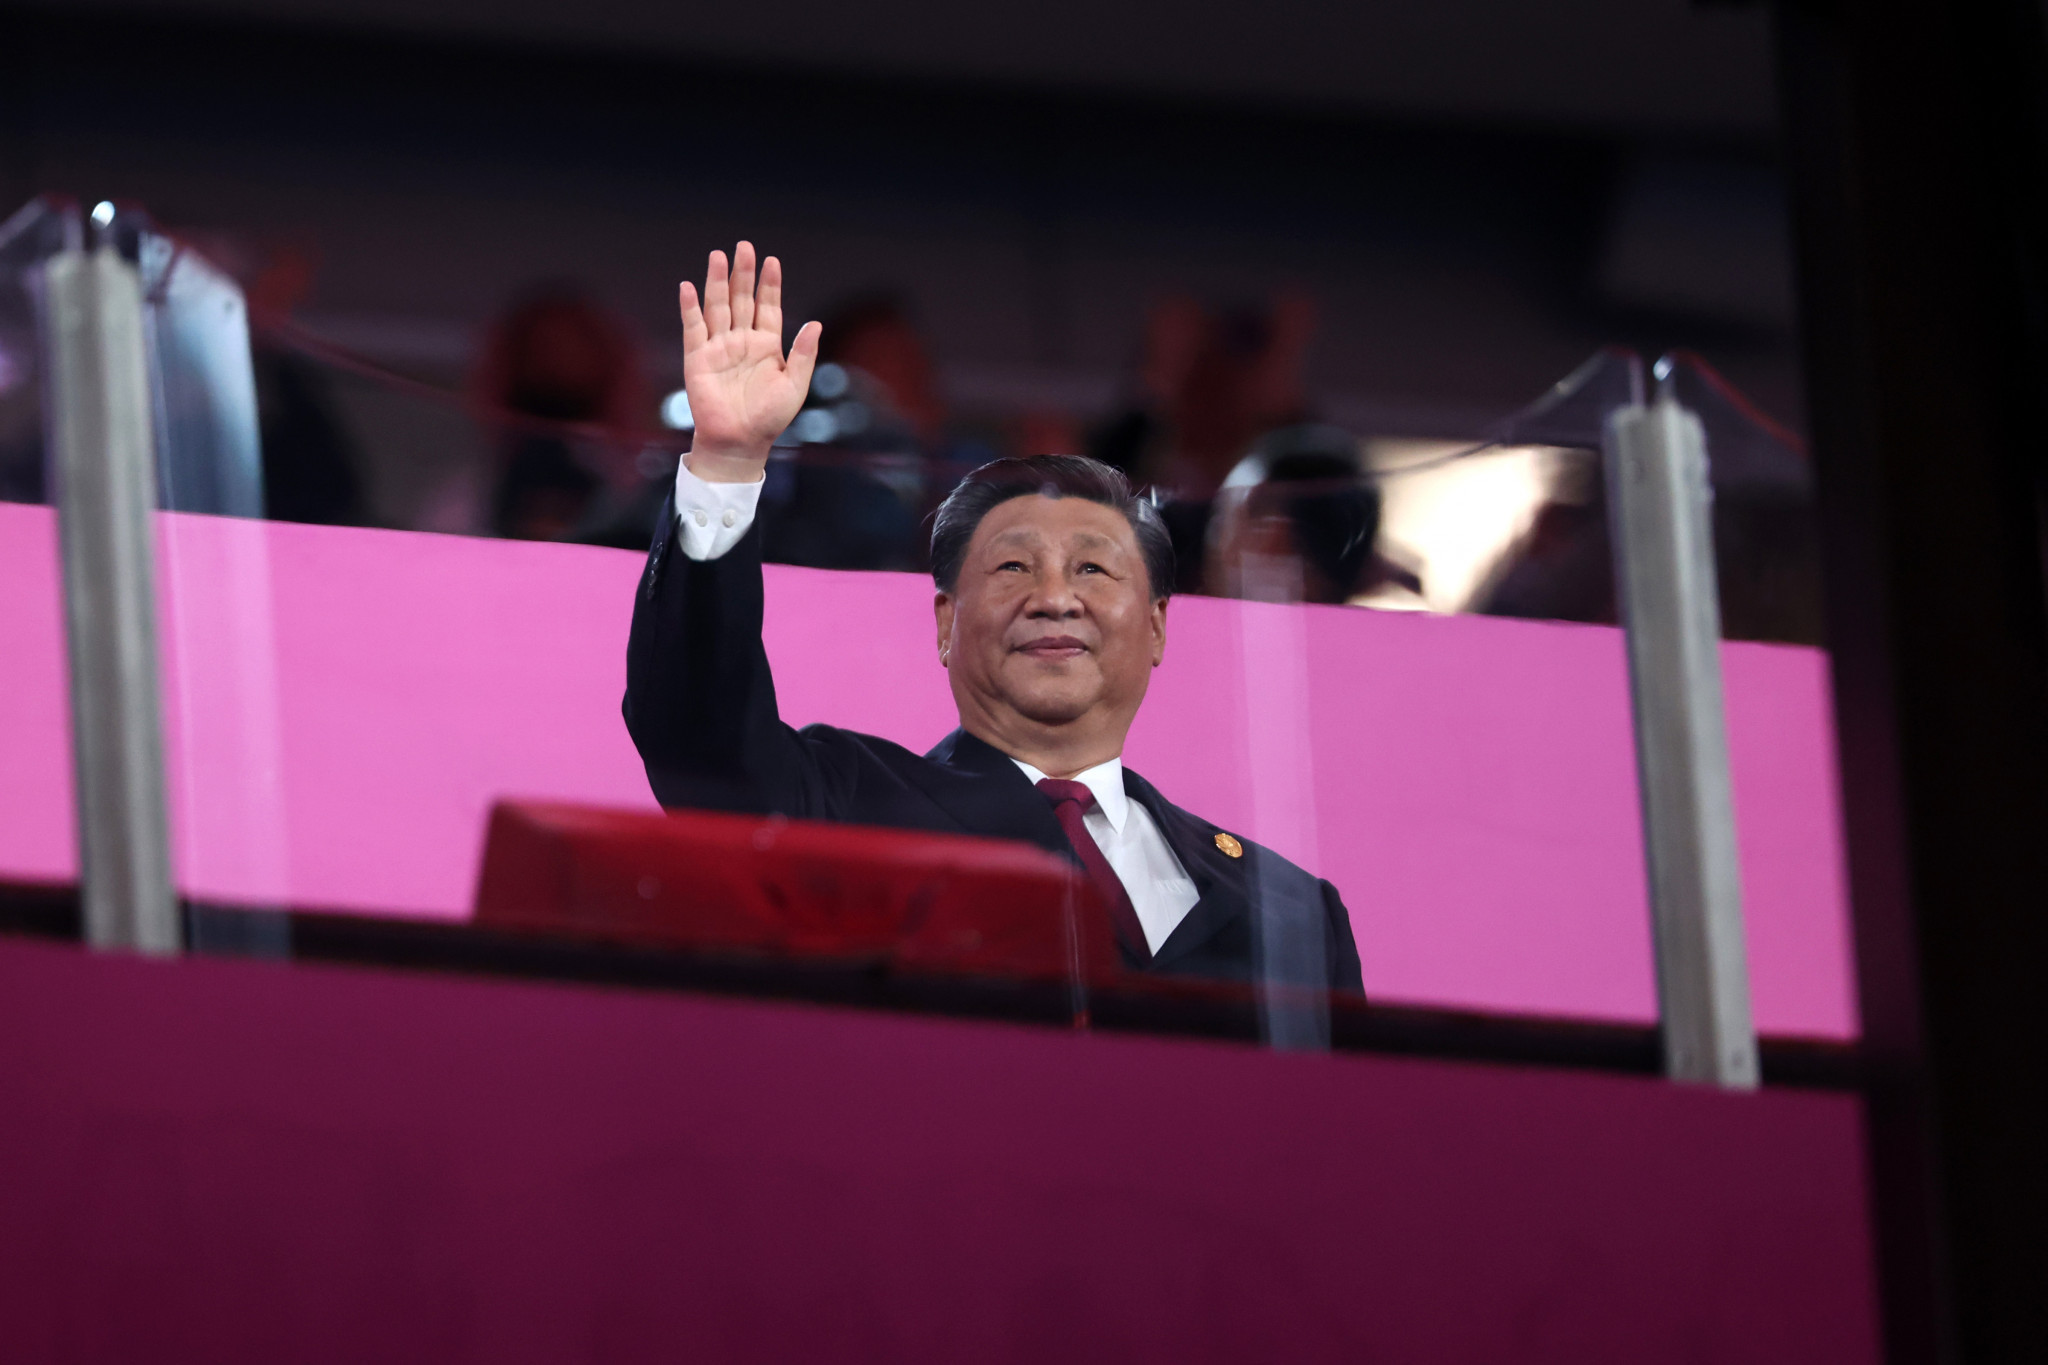 Juan Antonio Samaranch piled praise on Xi Jinping after he was hosted by the Chinese President during Hangzhou 2022 ©Getty Images